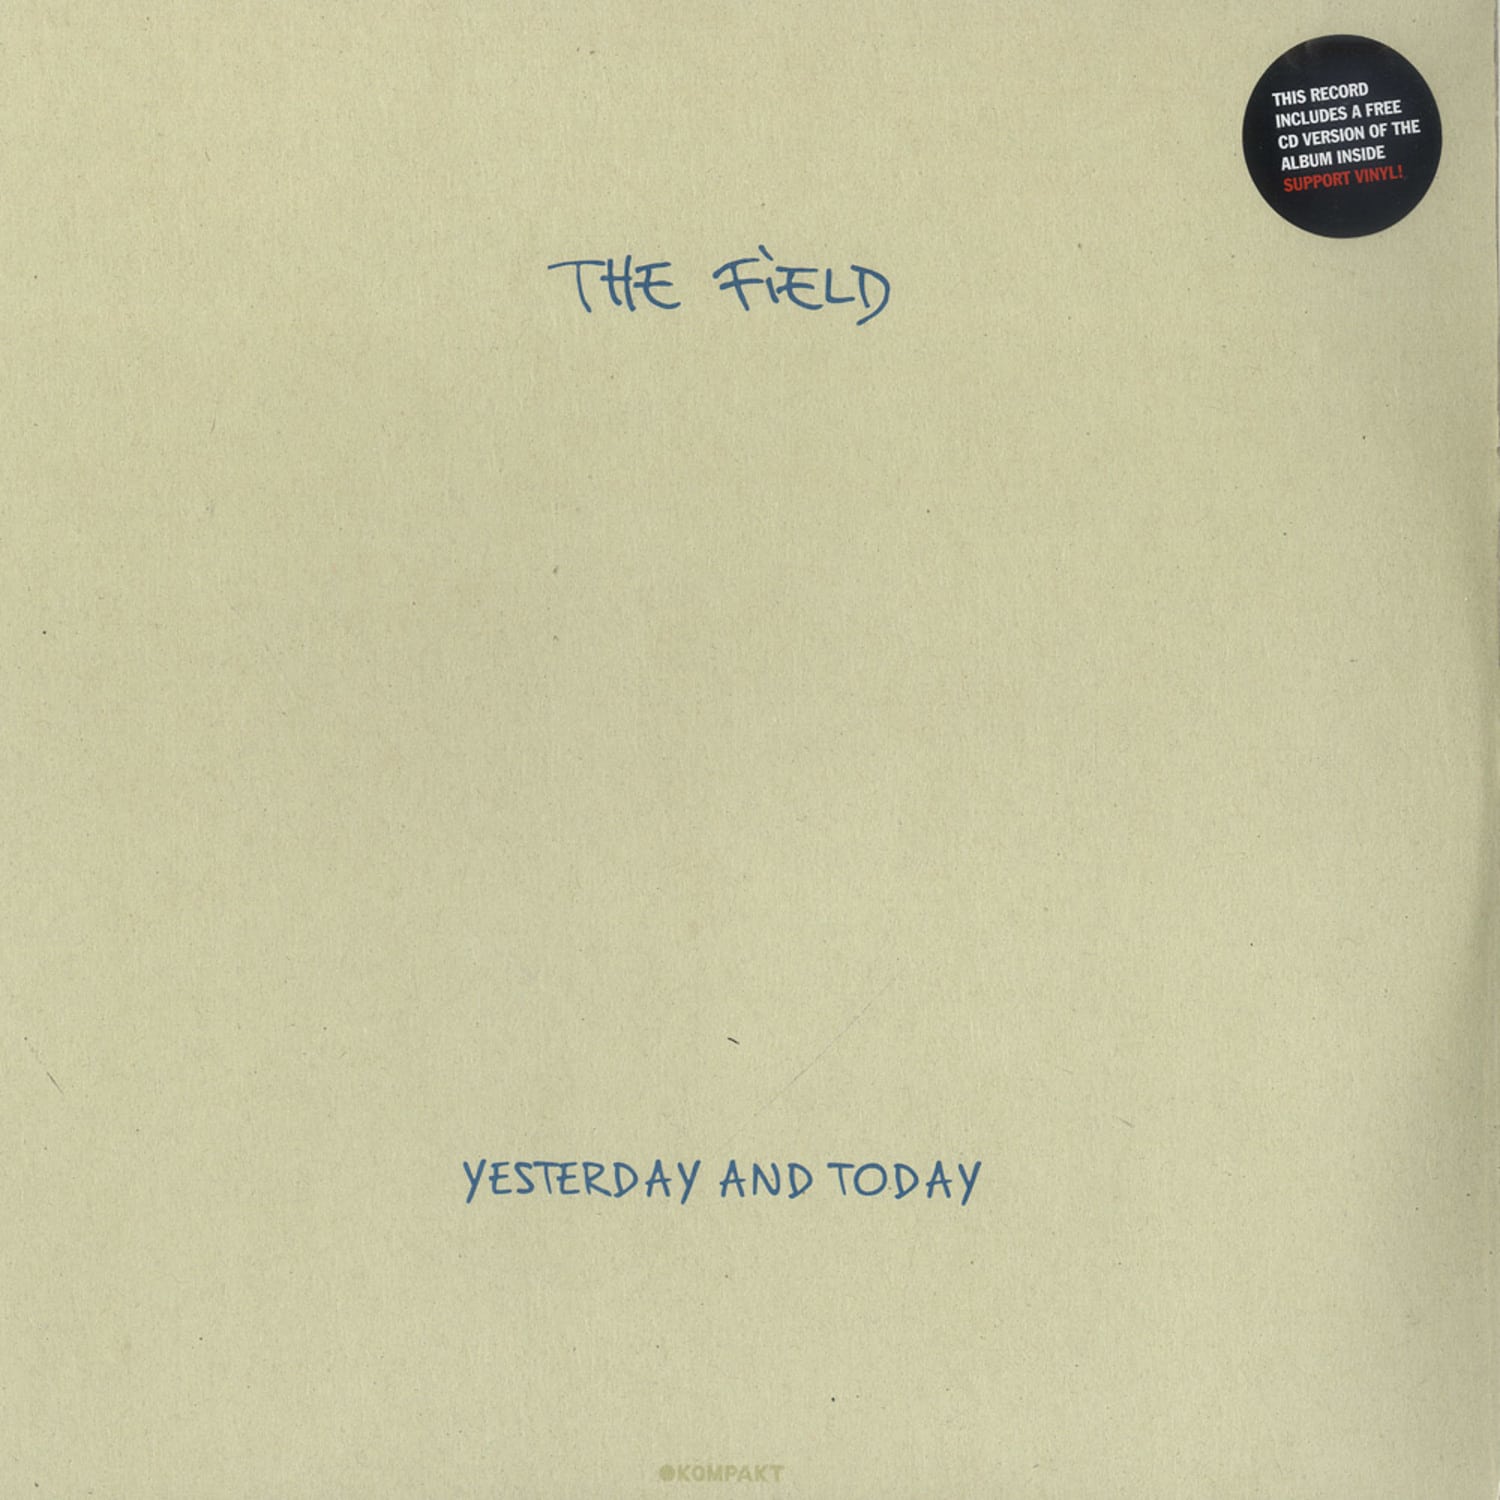 The Field - YESTERDAY AND TODAY 